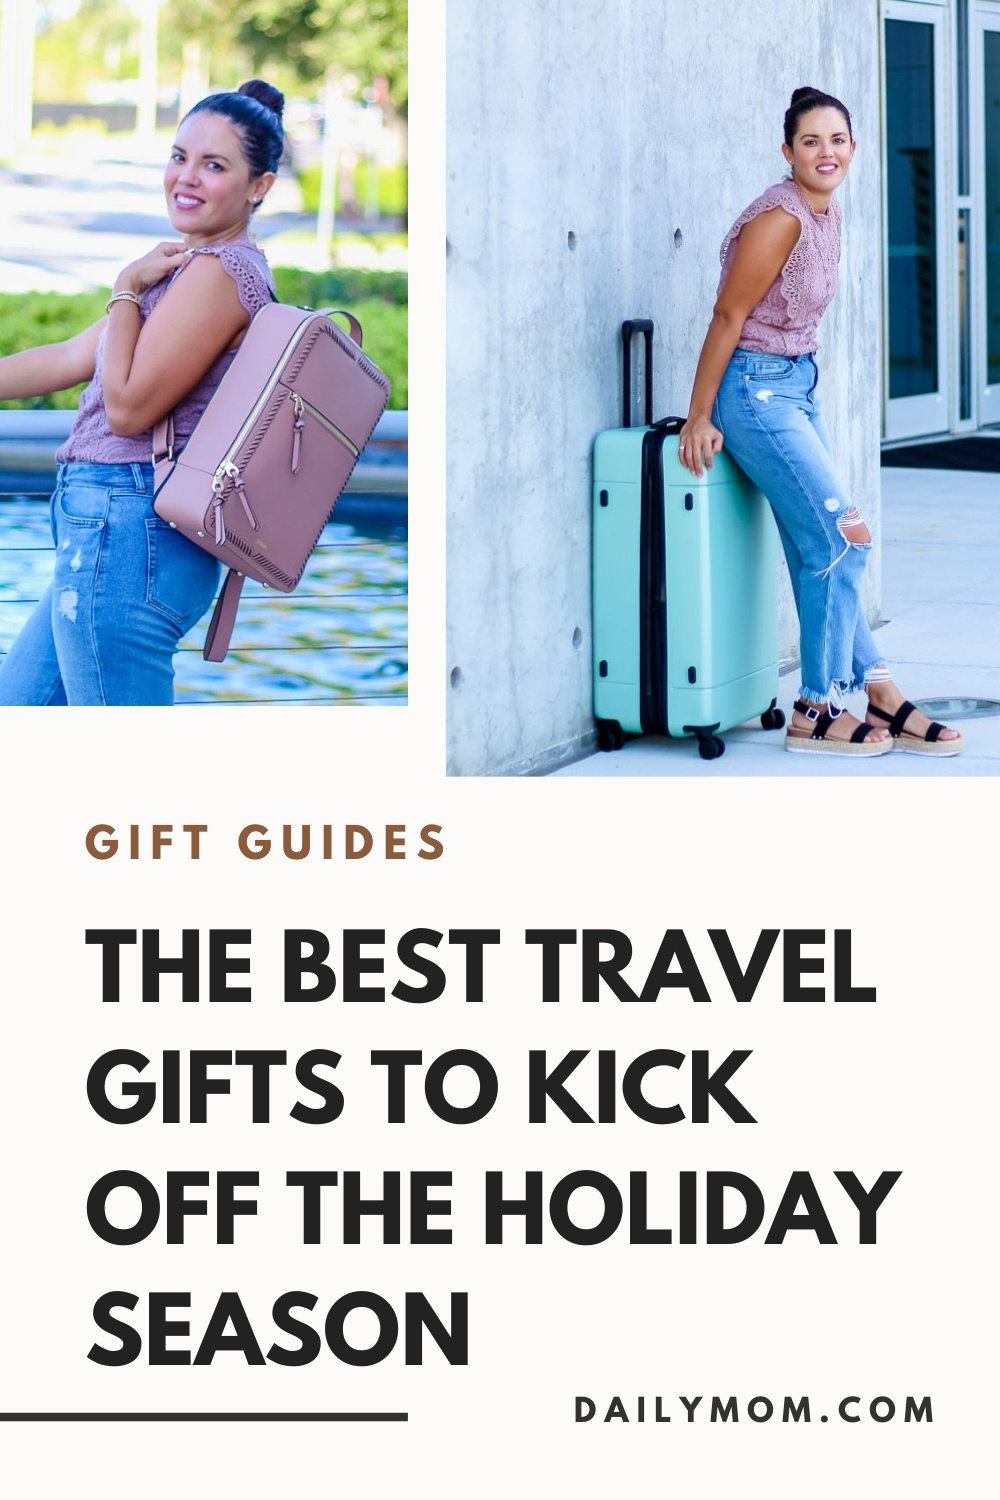 15 Of The Best Travel Gifts To Kick Off The Holiday Season